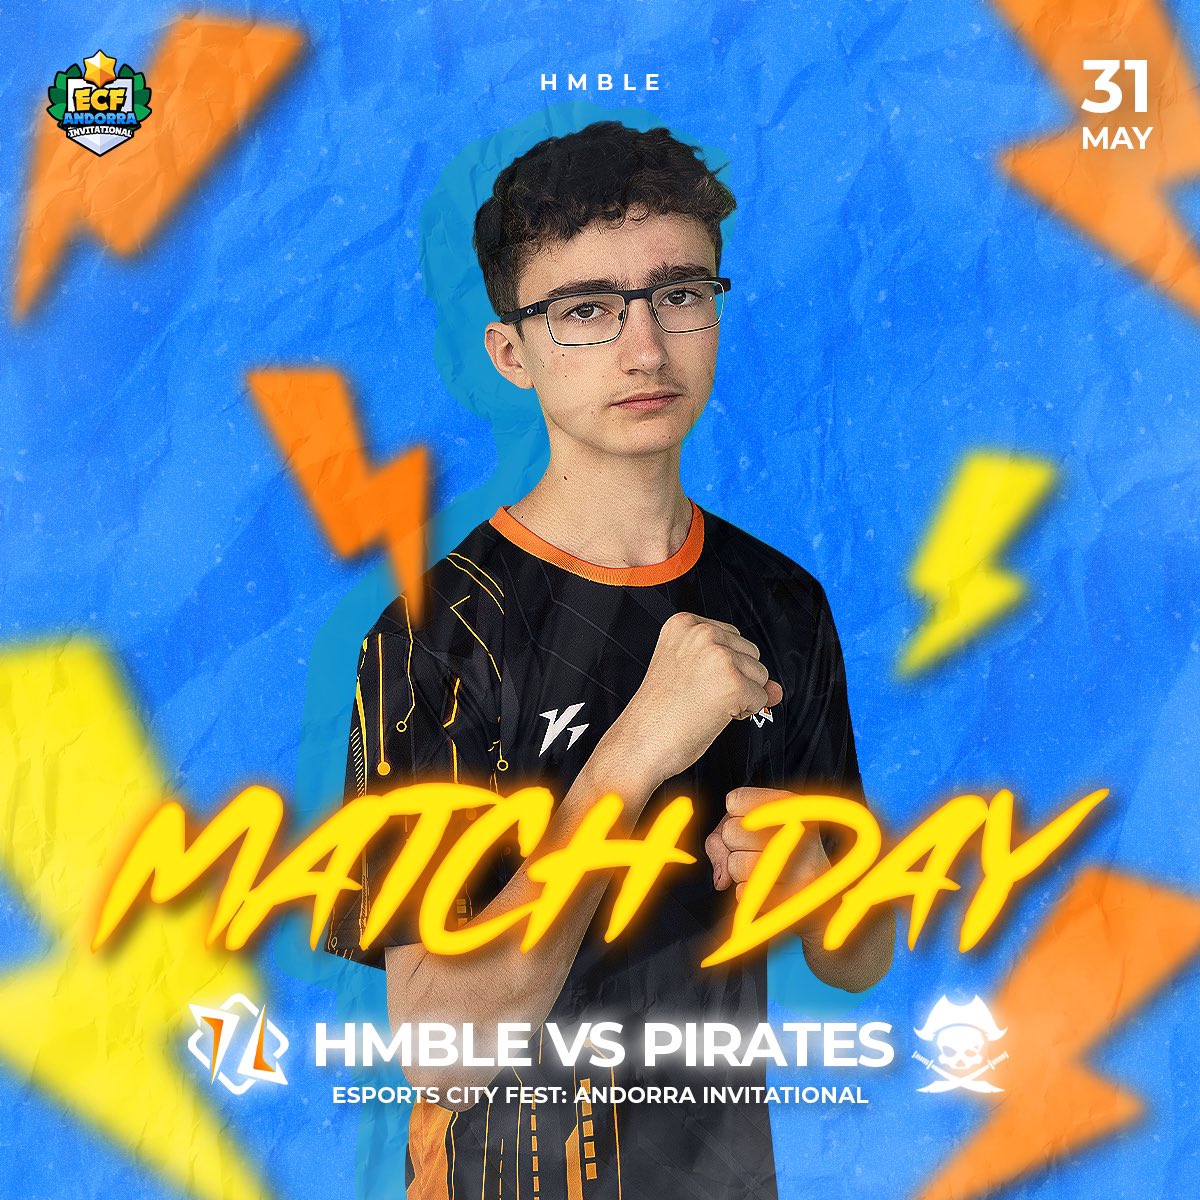 Did you know? 8 doctors out of 10 recommend to watch the first day of @esportscityfest Andorra Invitational, in particular our match 🆚 Pirates at 19.00 CEST #hmble